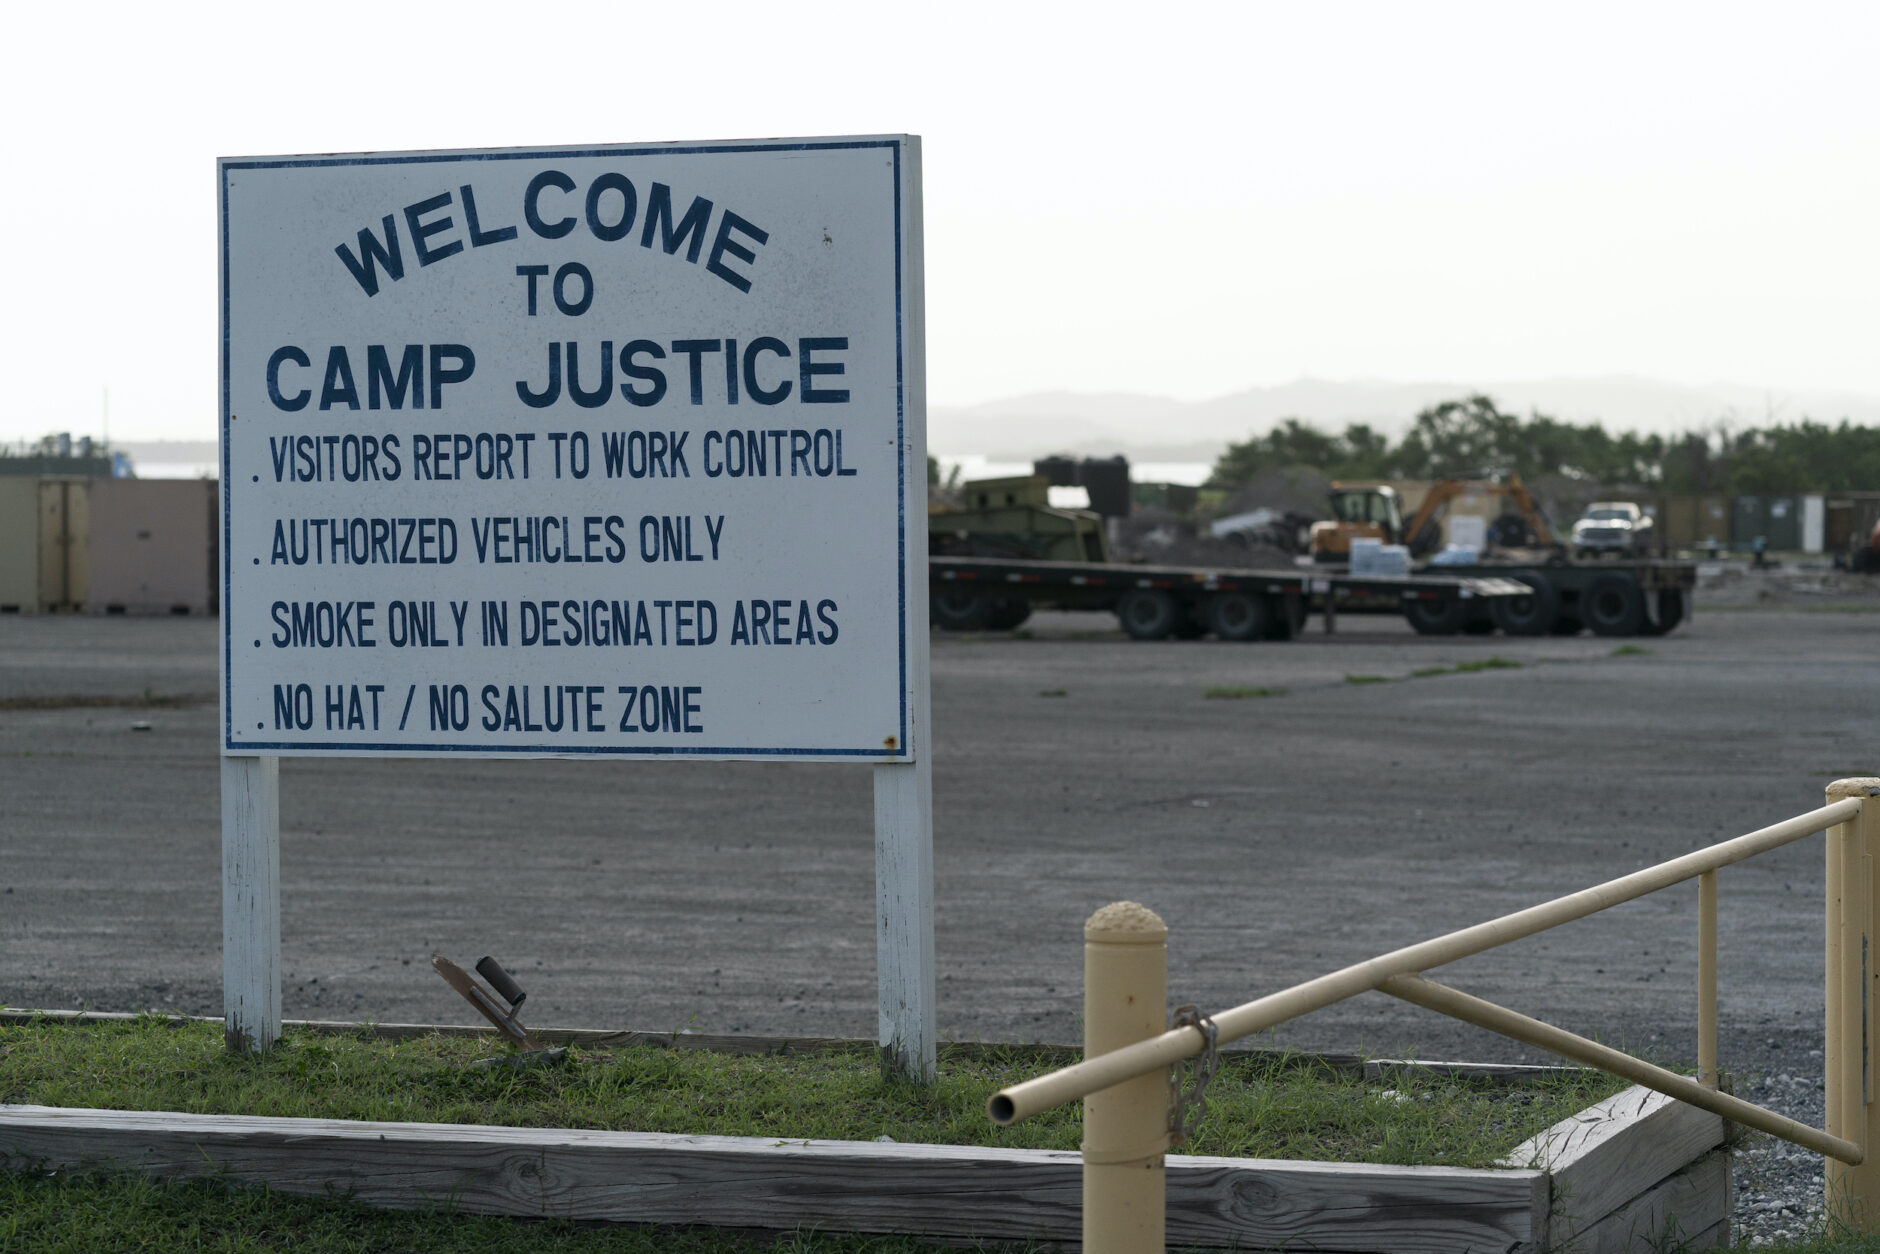 US releases Guantanamo prisoner once tortured at CIA sites